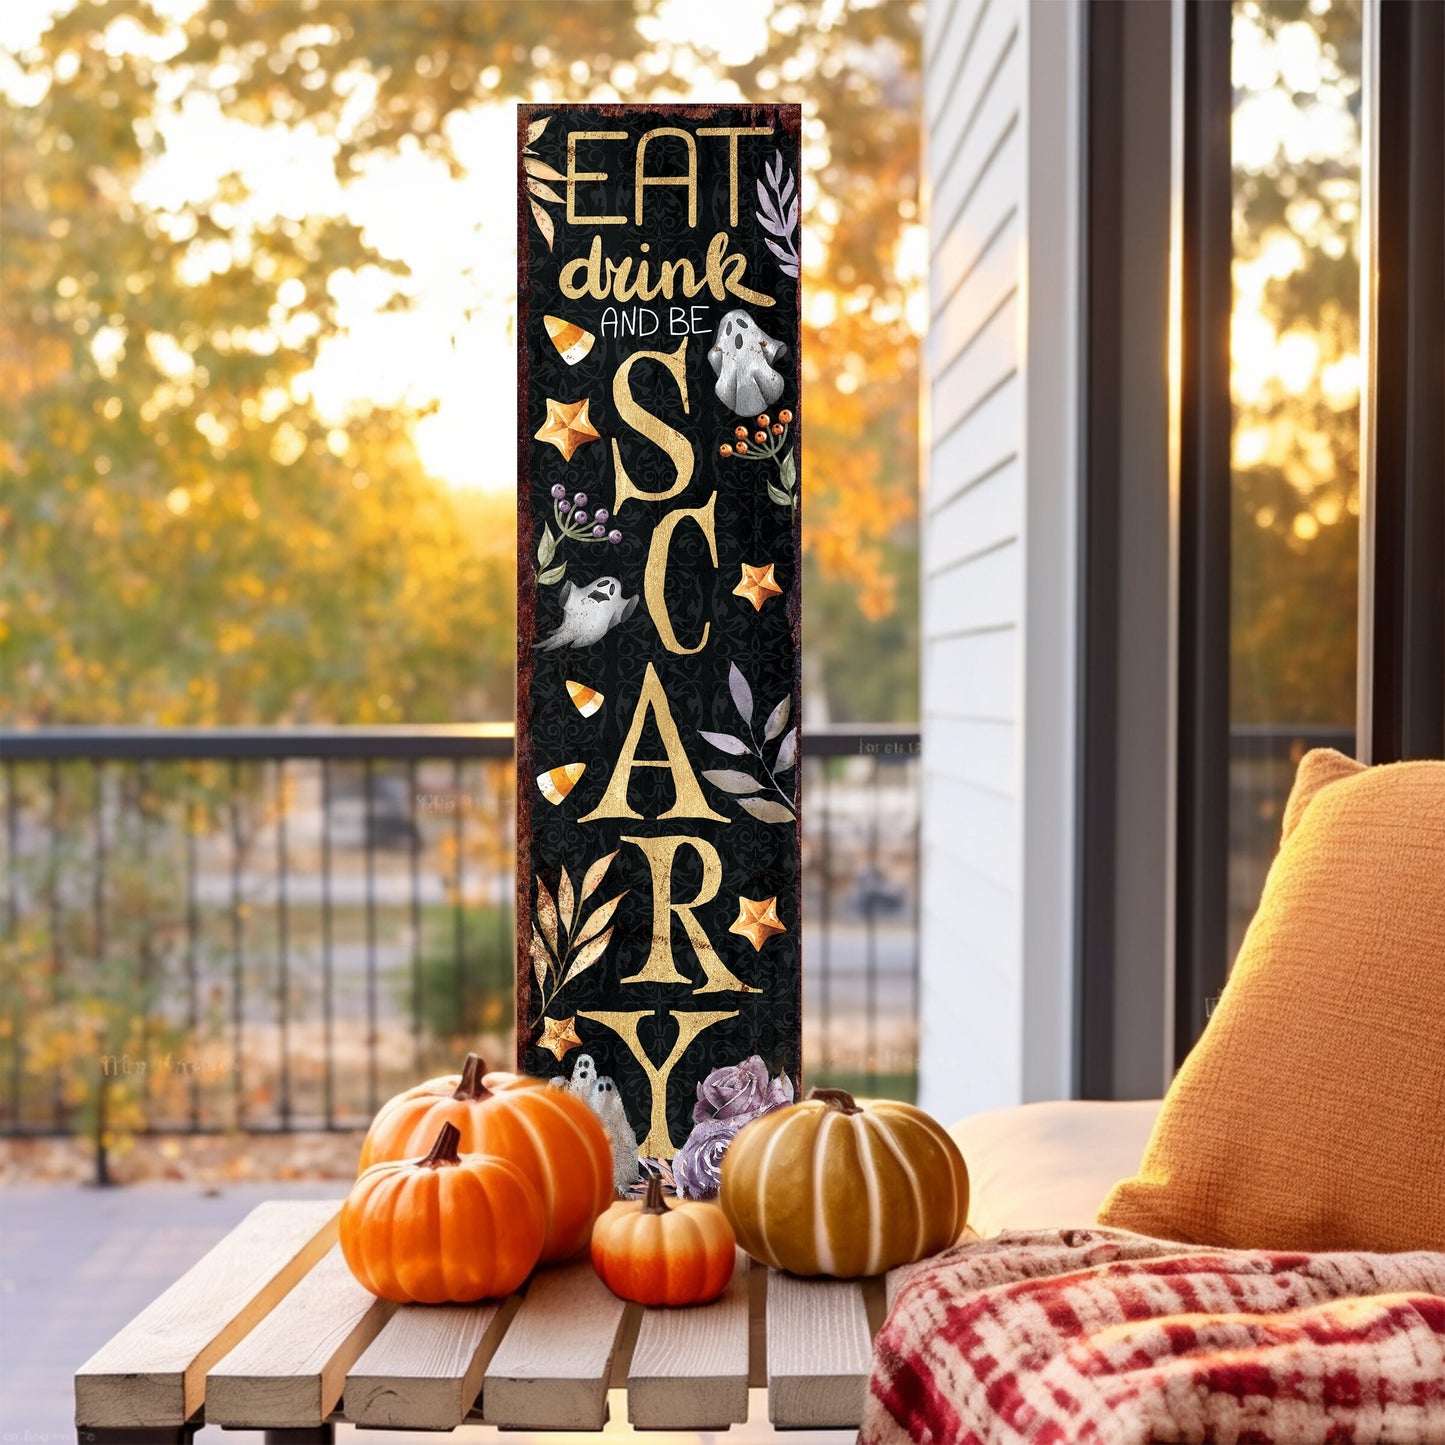 36in Eat, Drink, and Be Scary Halloween Porch Sign - Front Porch Halloween Welcome Sign, Rustic Modern Farmhouse Entryway Board